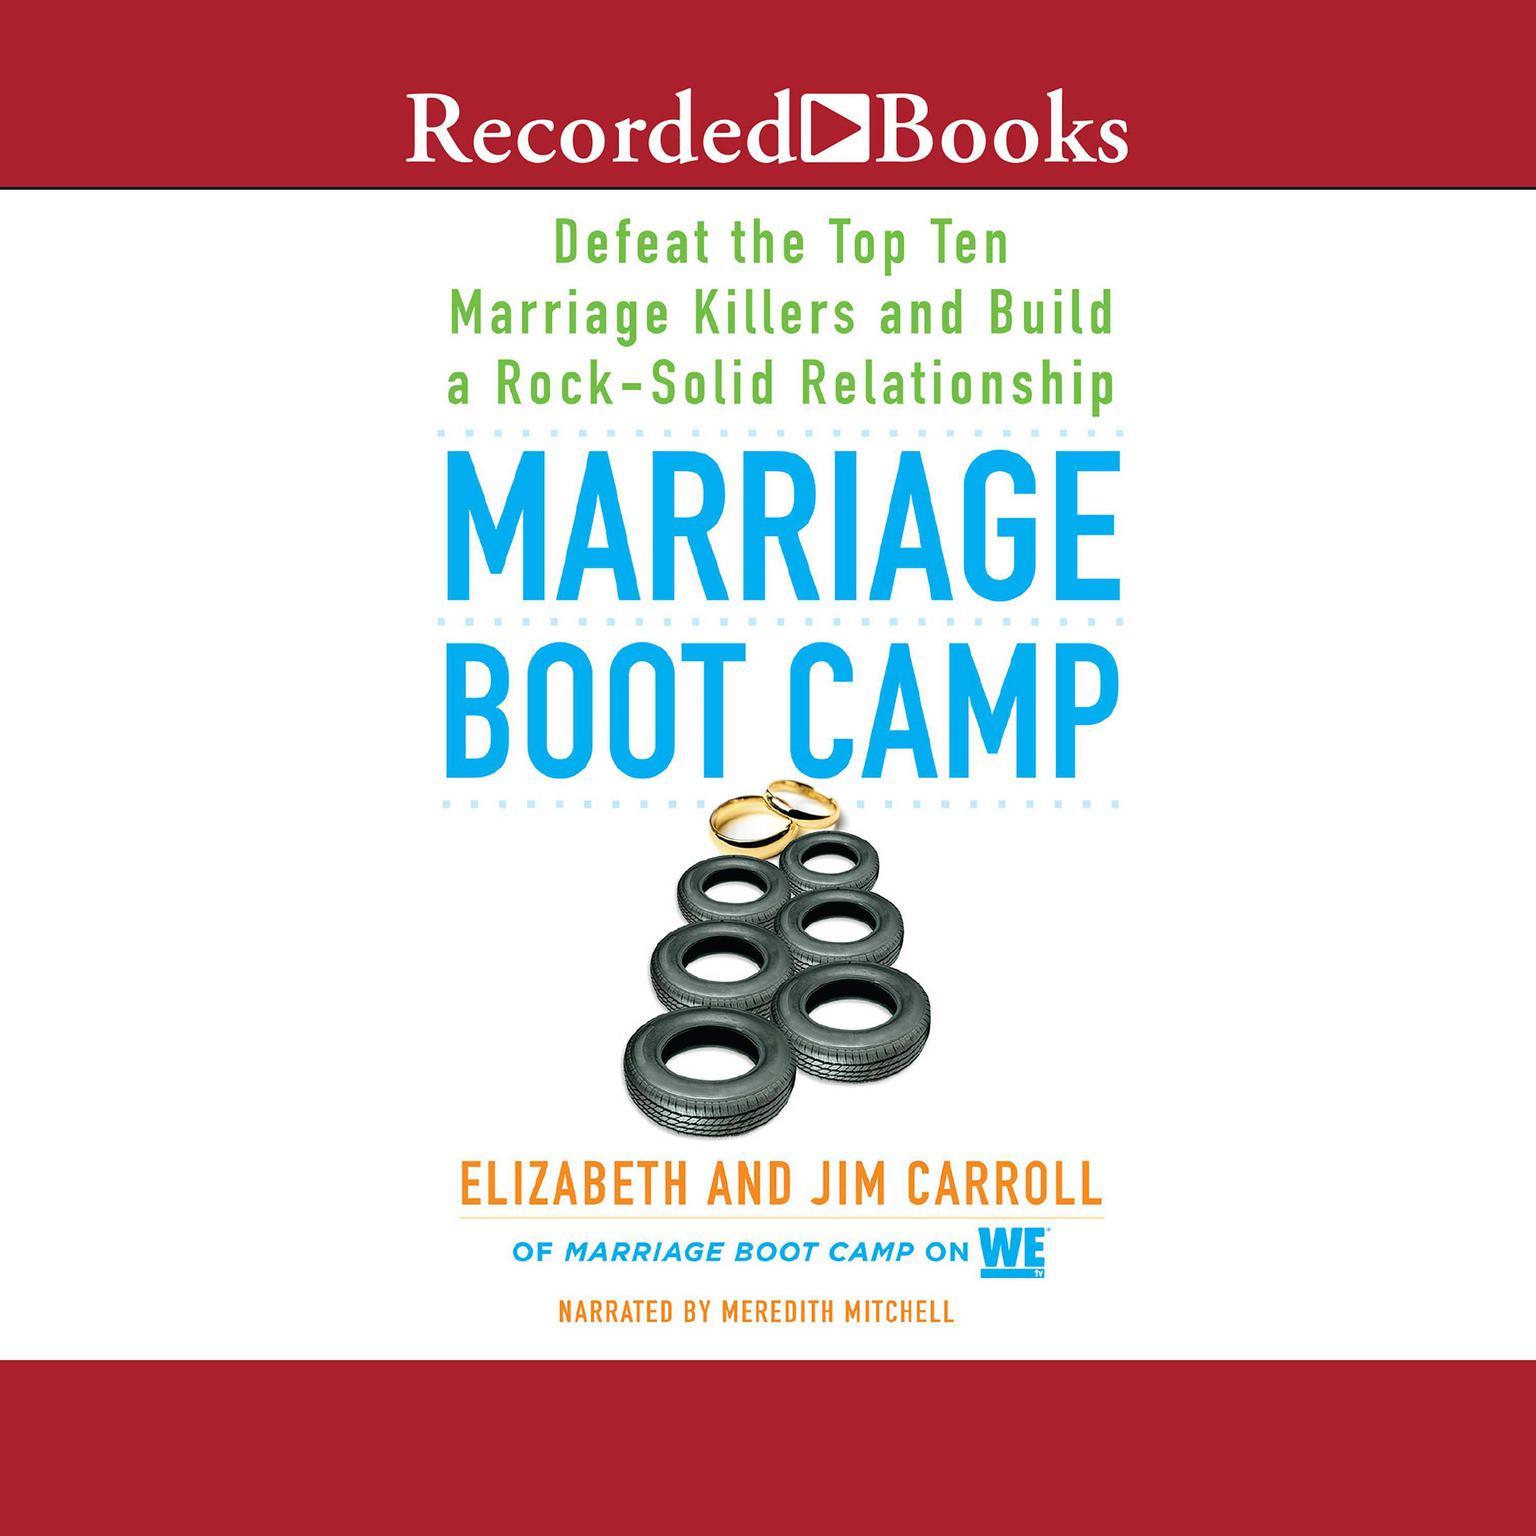 Marriage Boot Camp: Defeat the Top 10 Marriage Killers and Build a Rock-Solid Relationship Audiobook, by Elizabeth Carroll